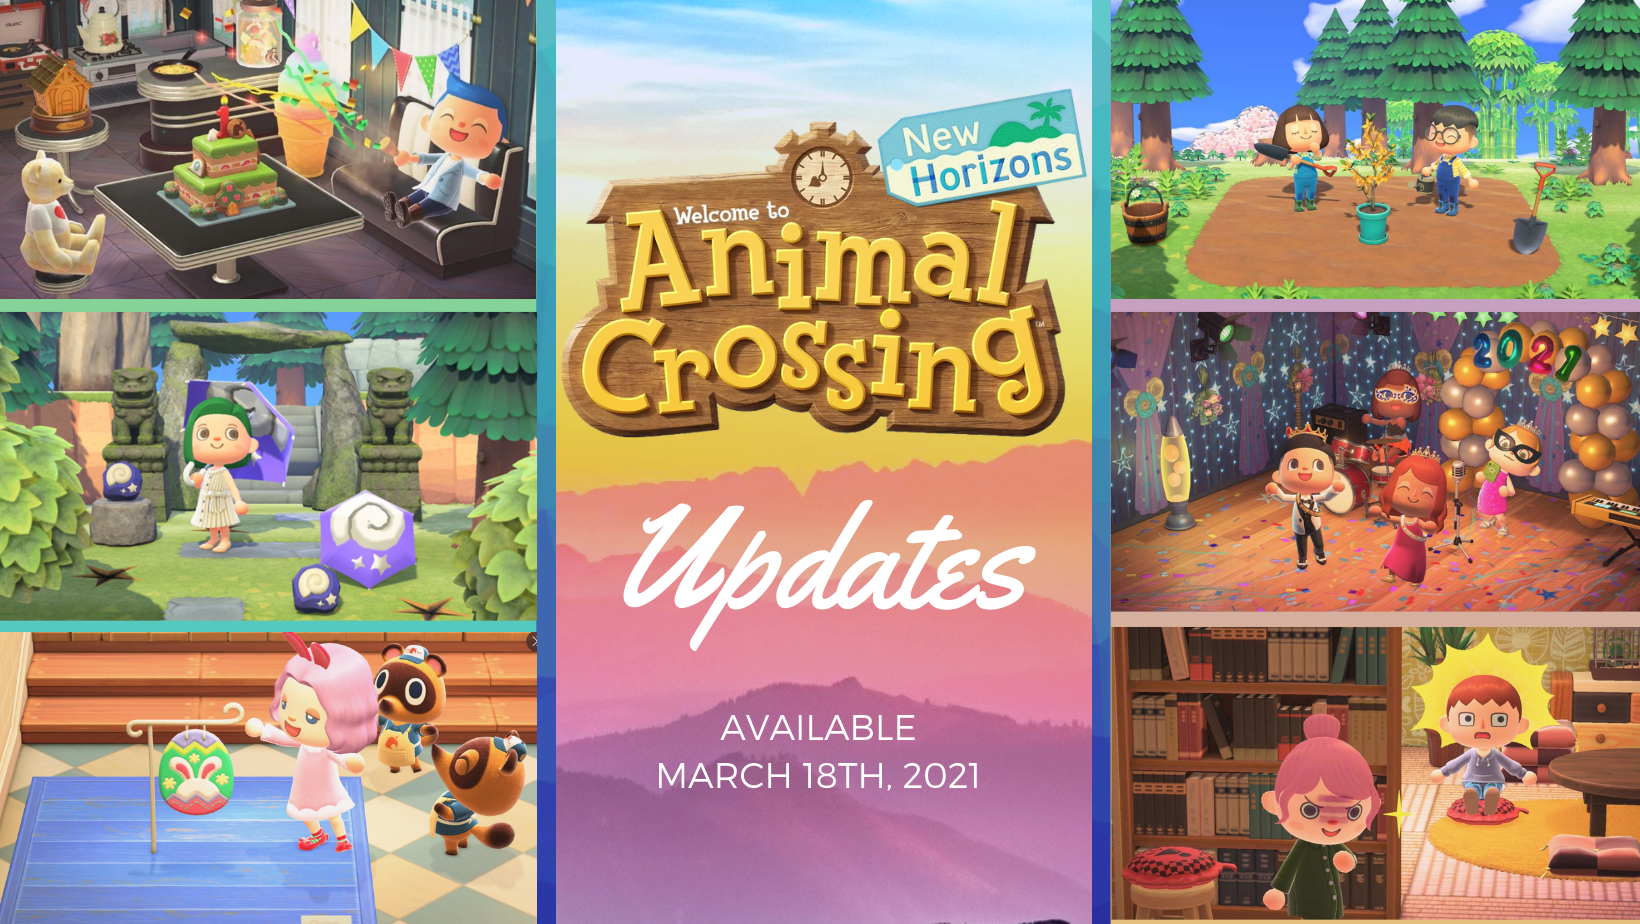  - Updates - Animal Crossing: New Horizons Sanrio Update -  Latest Items, Residents, Events, Designs, Dreams, and more!